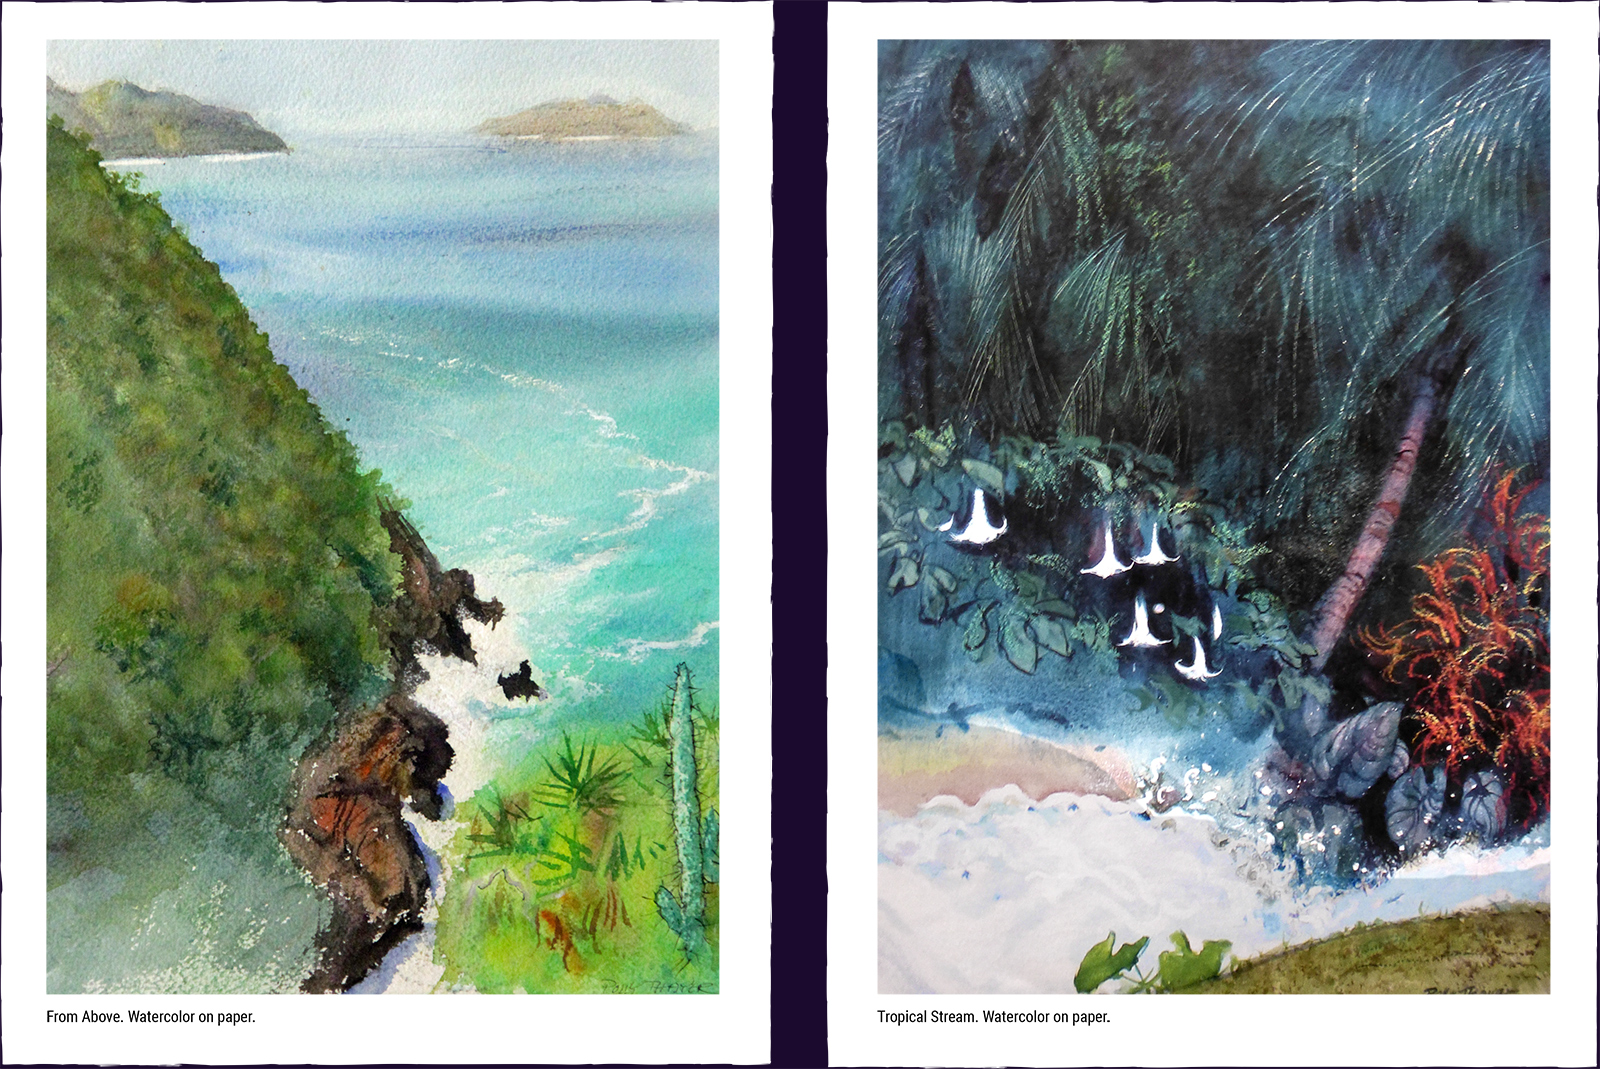 Two landscape paintings. (1) From Above. Watercolor on paper. (2) Tropical Stream. Watercolor on paper.